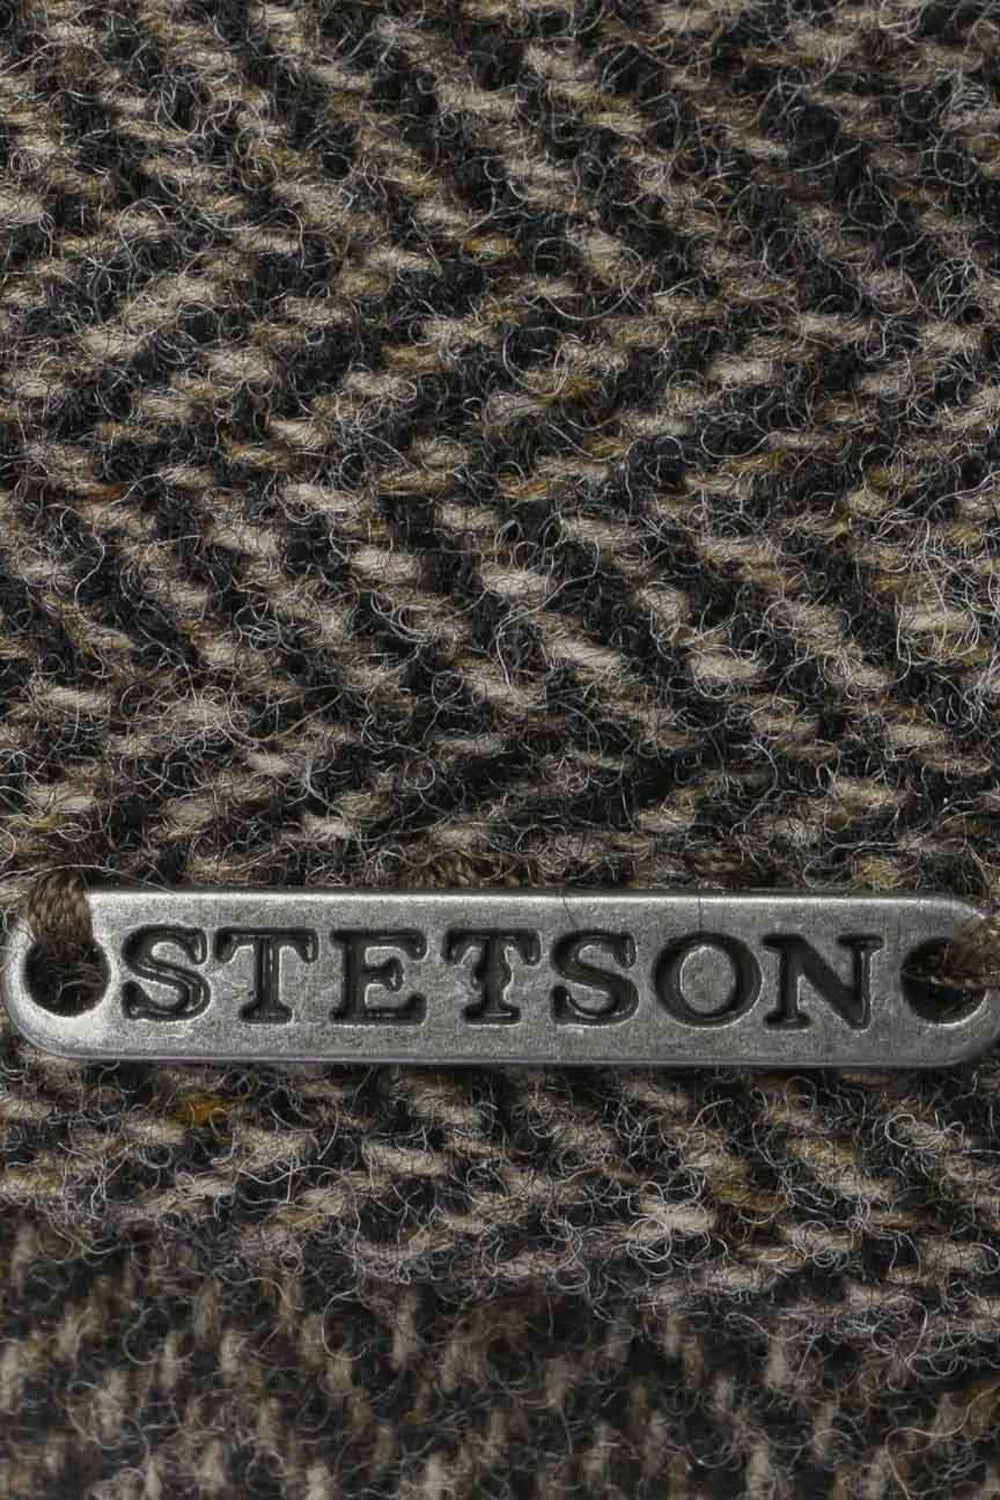 Buy the Stetson Belfast Classic Wool Flat Cap in Grey/White at Intro. Spend £50 for free UK delivery. Official stockists. We ship worldwide.